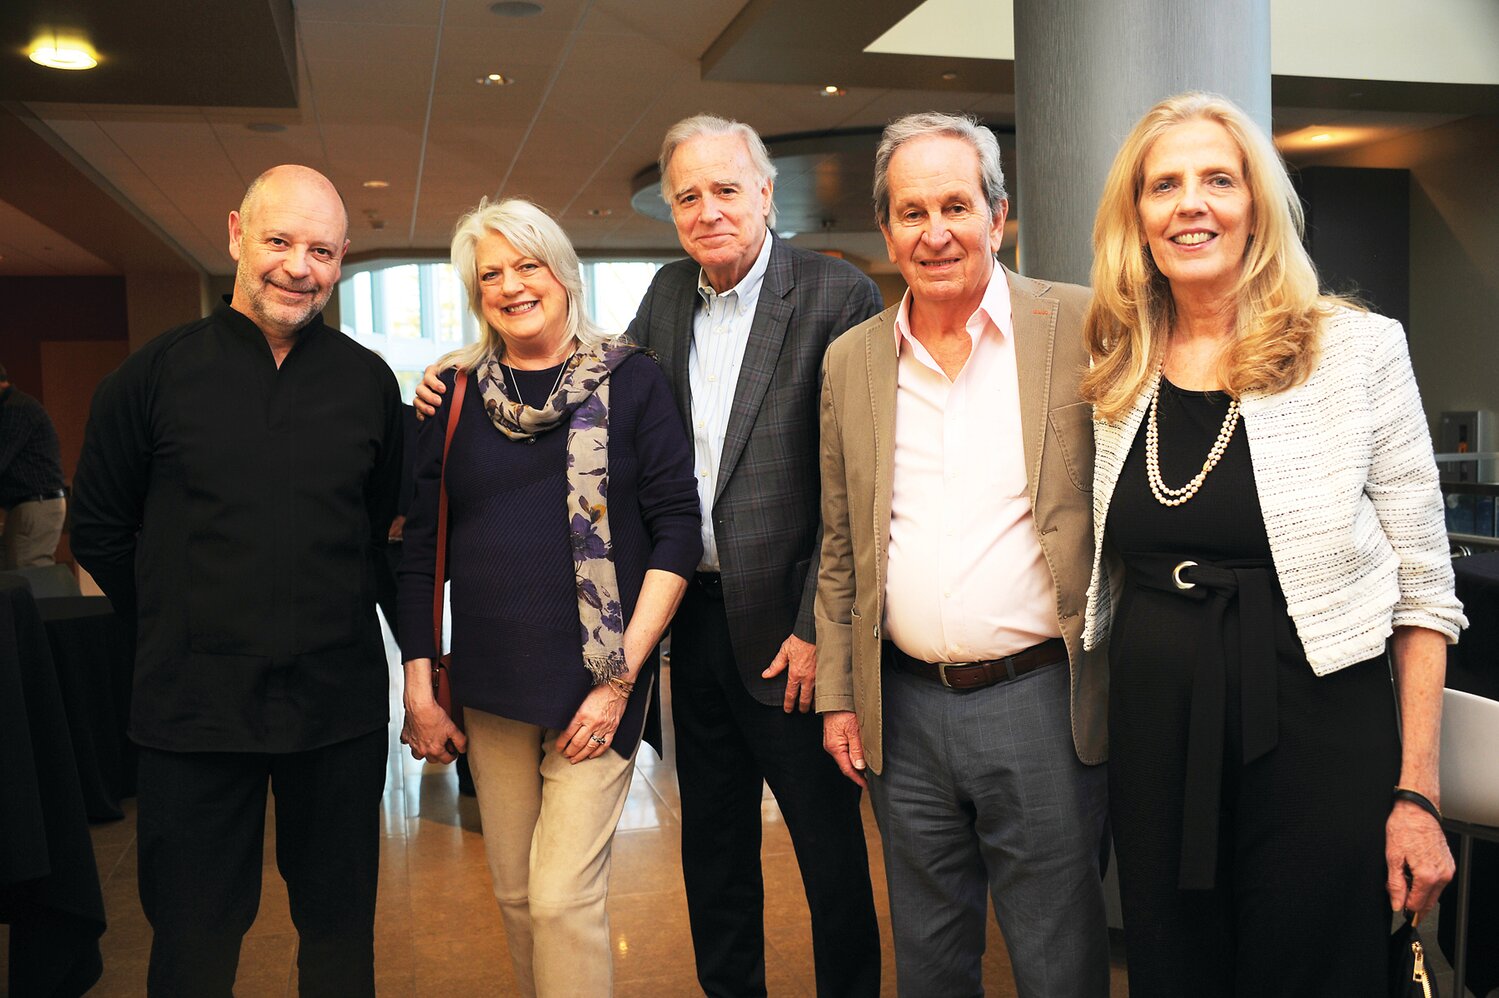 José Luis Domínguez, music director of the Bucks County Symphony Orchestra; Valerie and Rod Eastburn, Joe Wiedenmayer and Tricia Thomas.